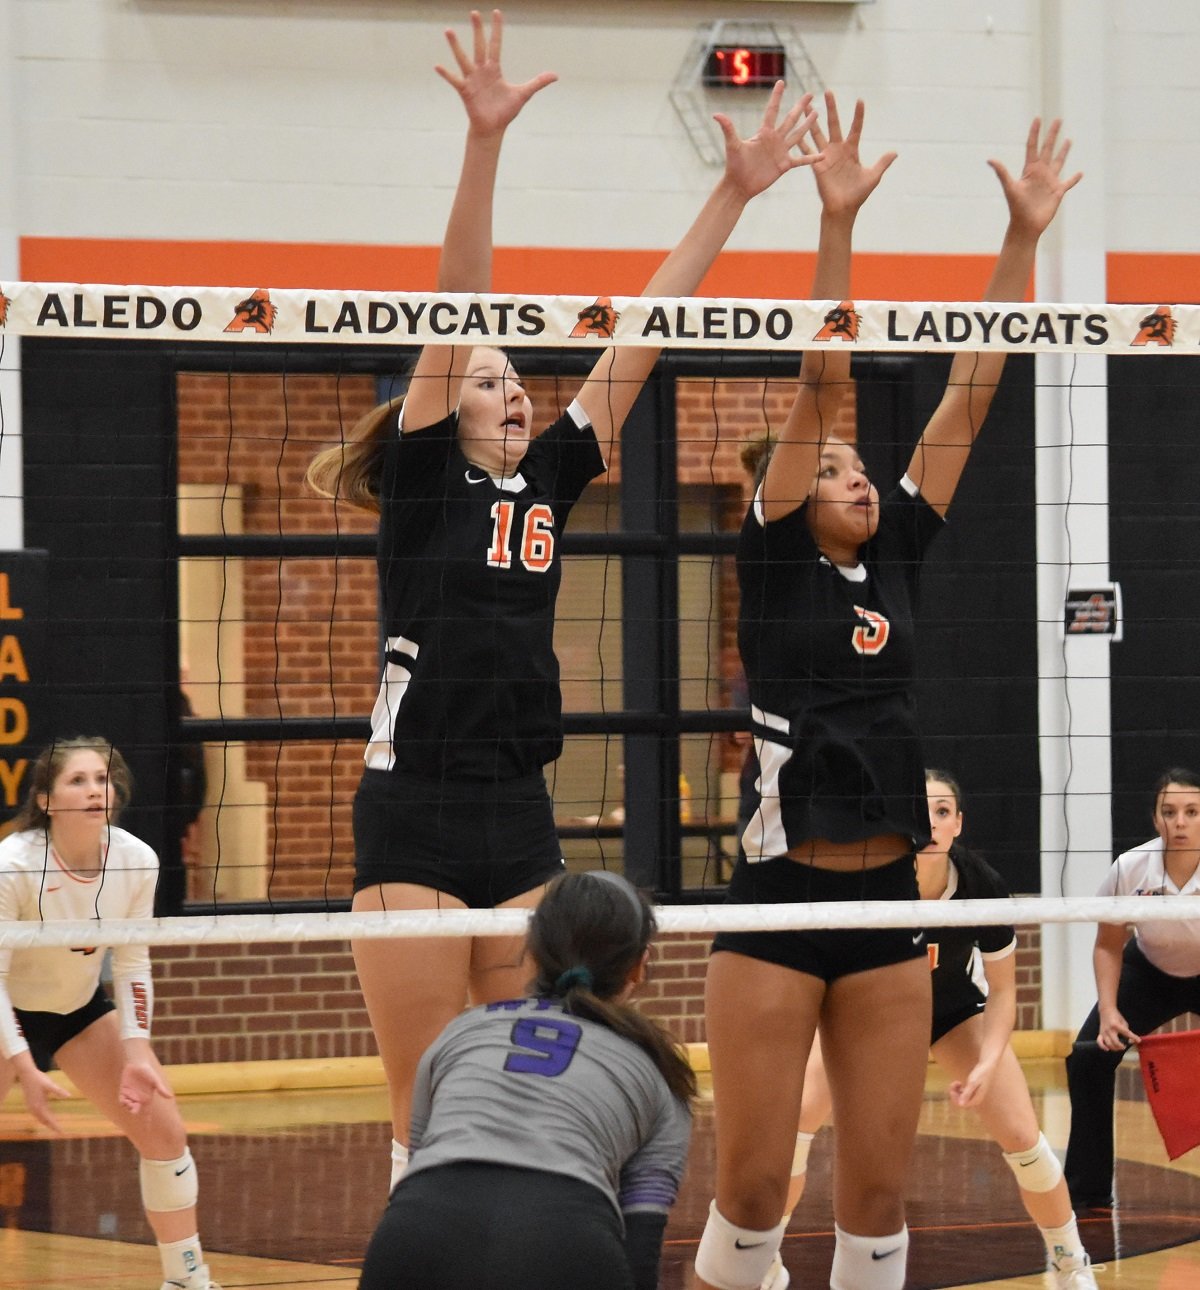 Aledo hitters Lilly Taylor (16) and Audrey Pearce (3) elevate for a block during a recent match. The Ladycats swept Wichita Falls High School Tuesday night at Wichita Falls. Photo by Tony Eierdam